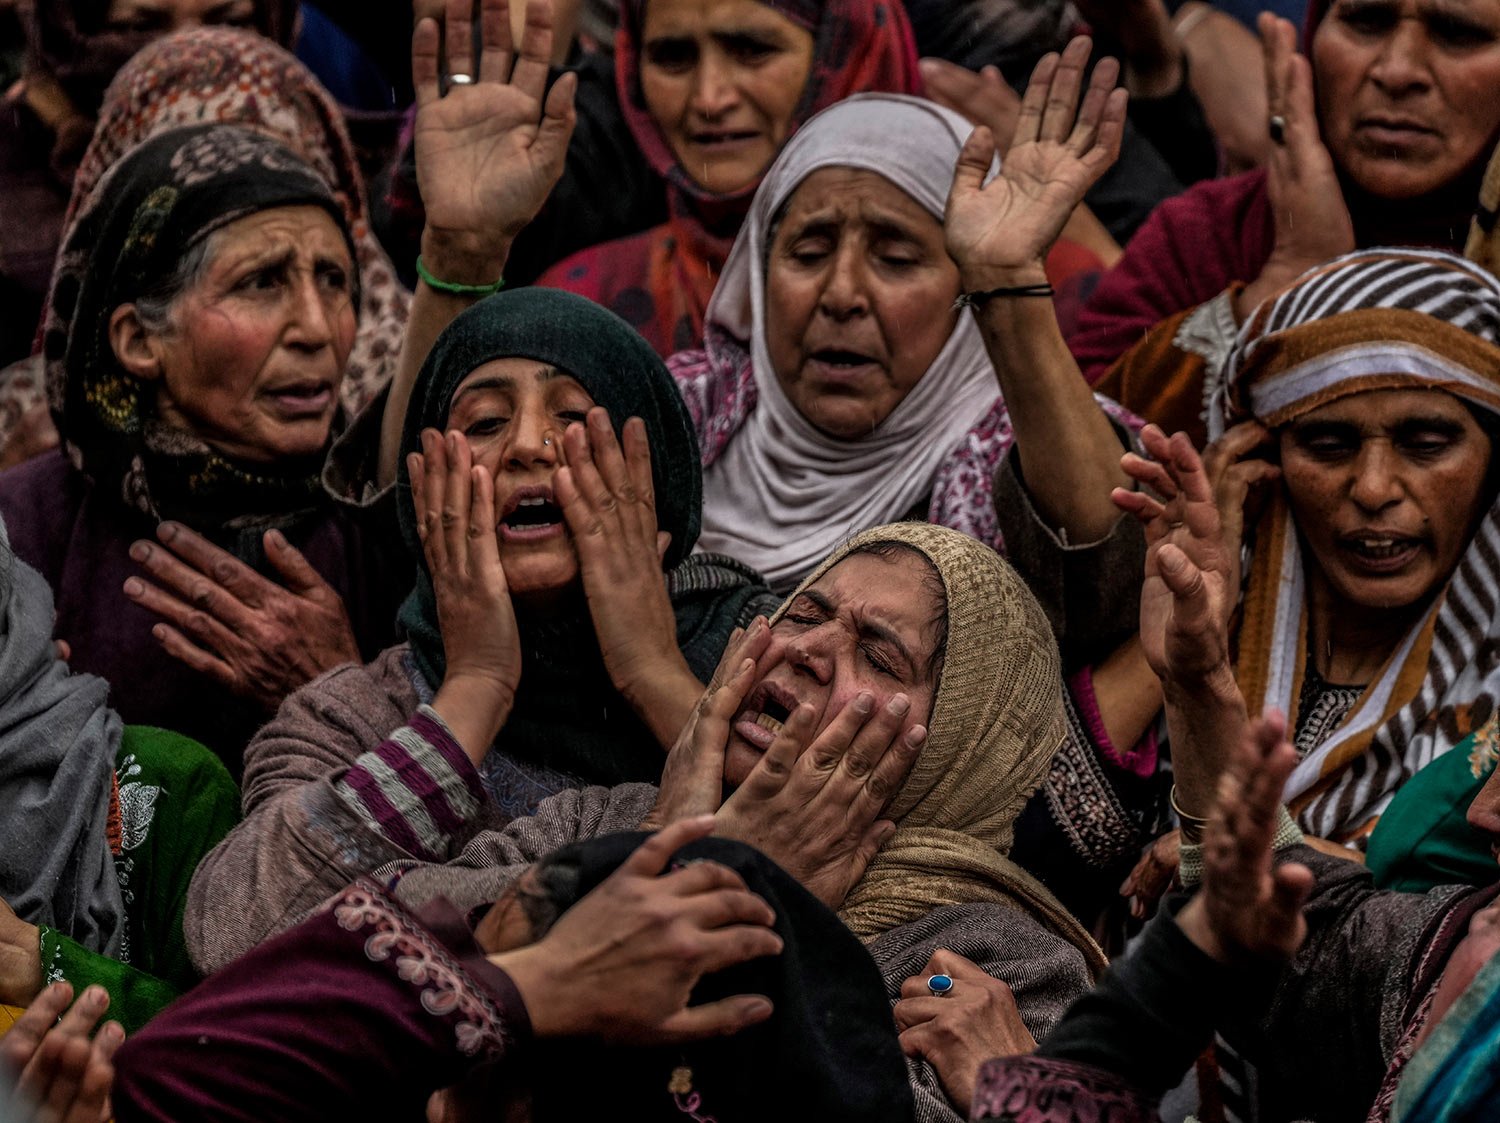  Family members and relatives mourn near the body of Rafia Nazir, a young Kashmiri woman killed in grenade attack, during her funeral in Srinagar, Indian-controlled Kashmir, Monday, March 7, 2022. (AP Photo/Mukhtar Khan) 